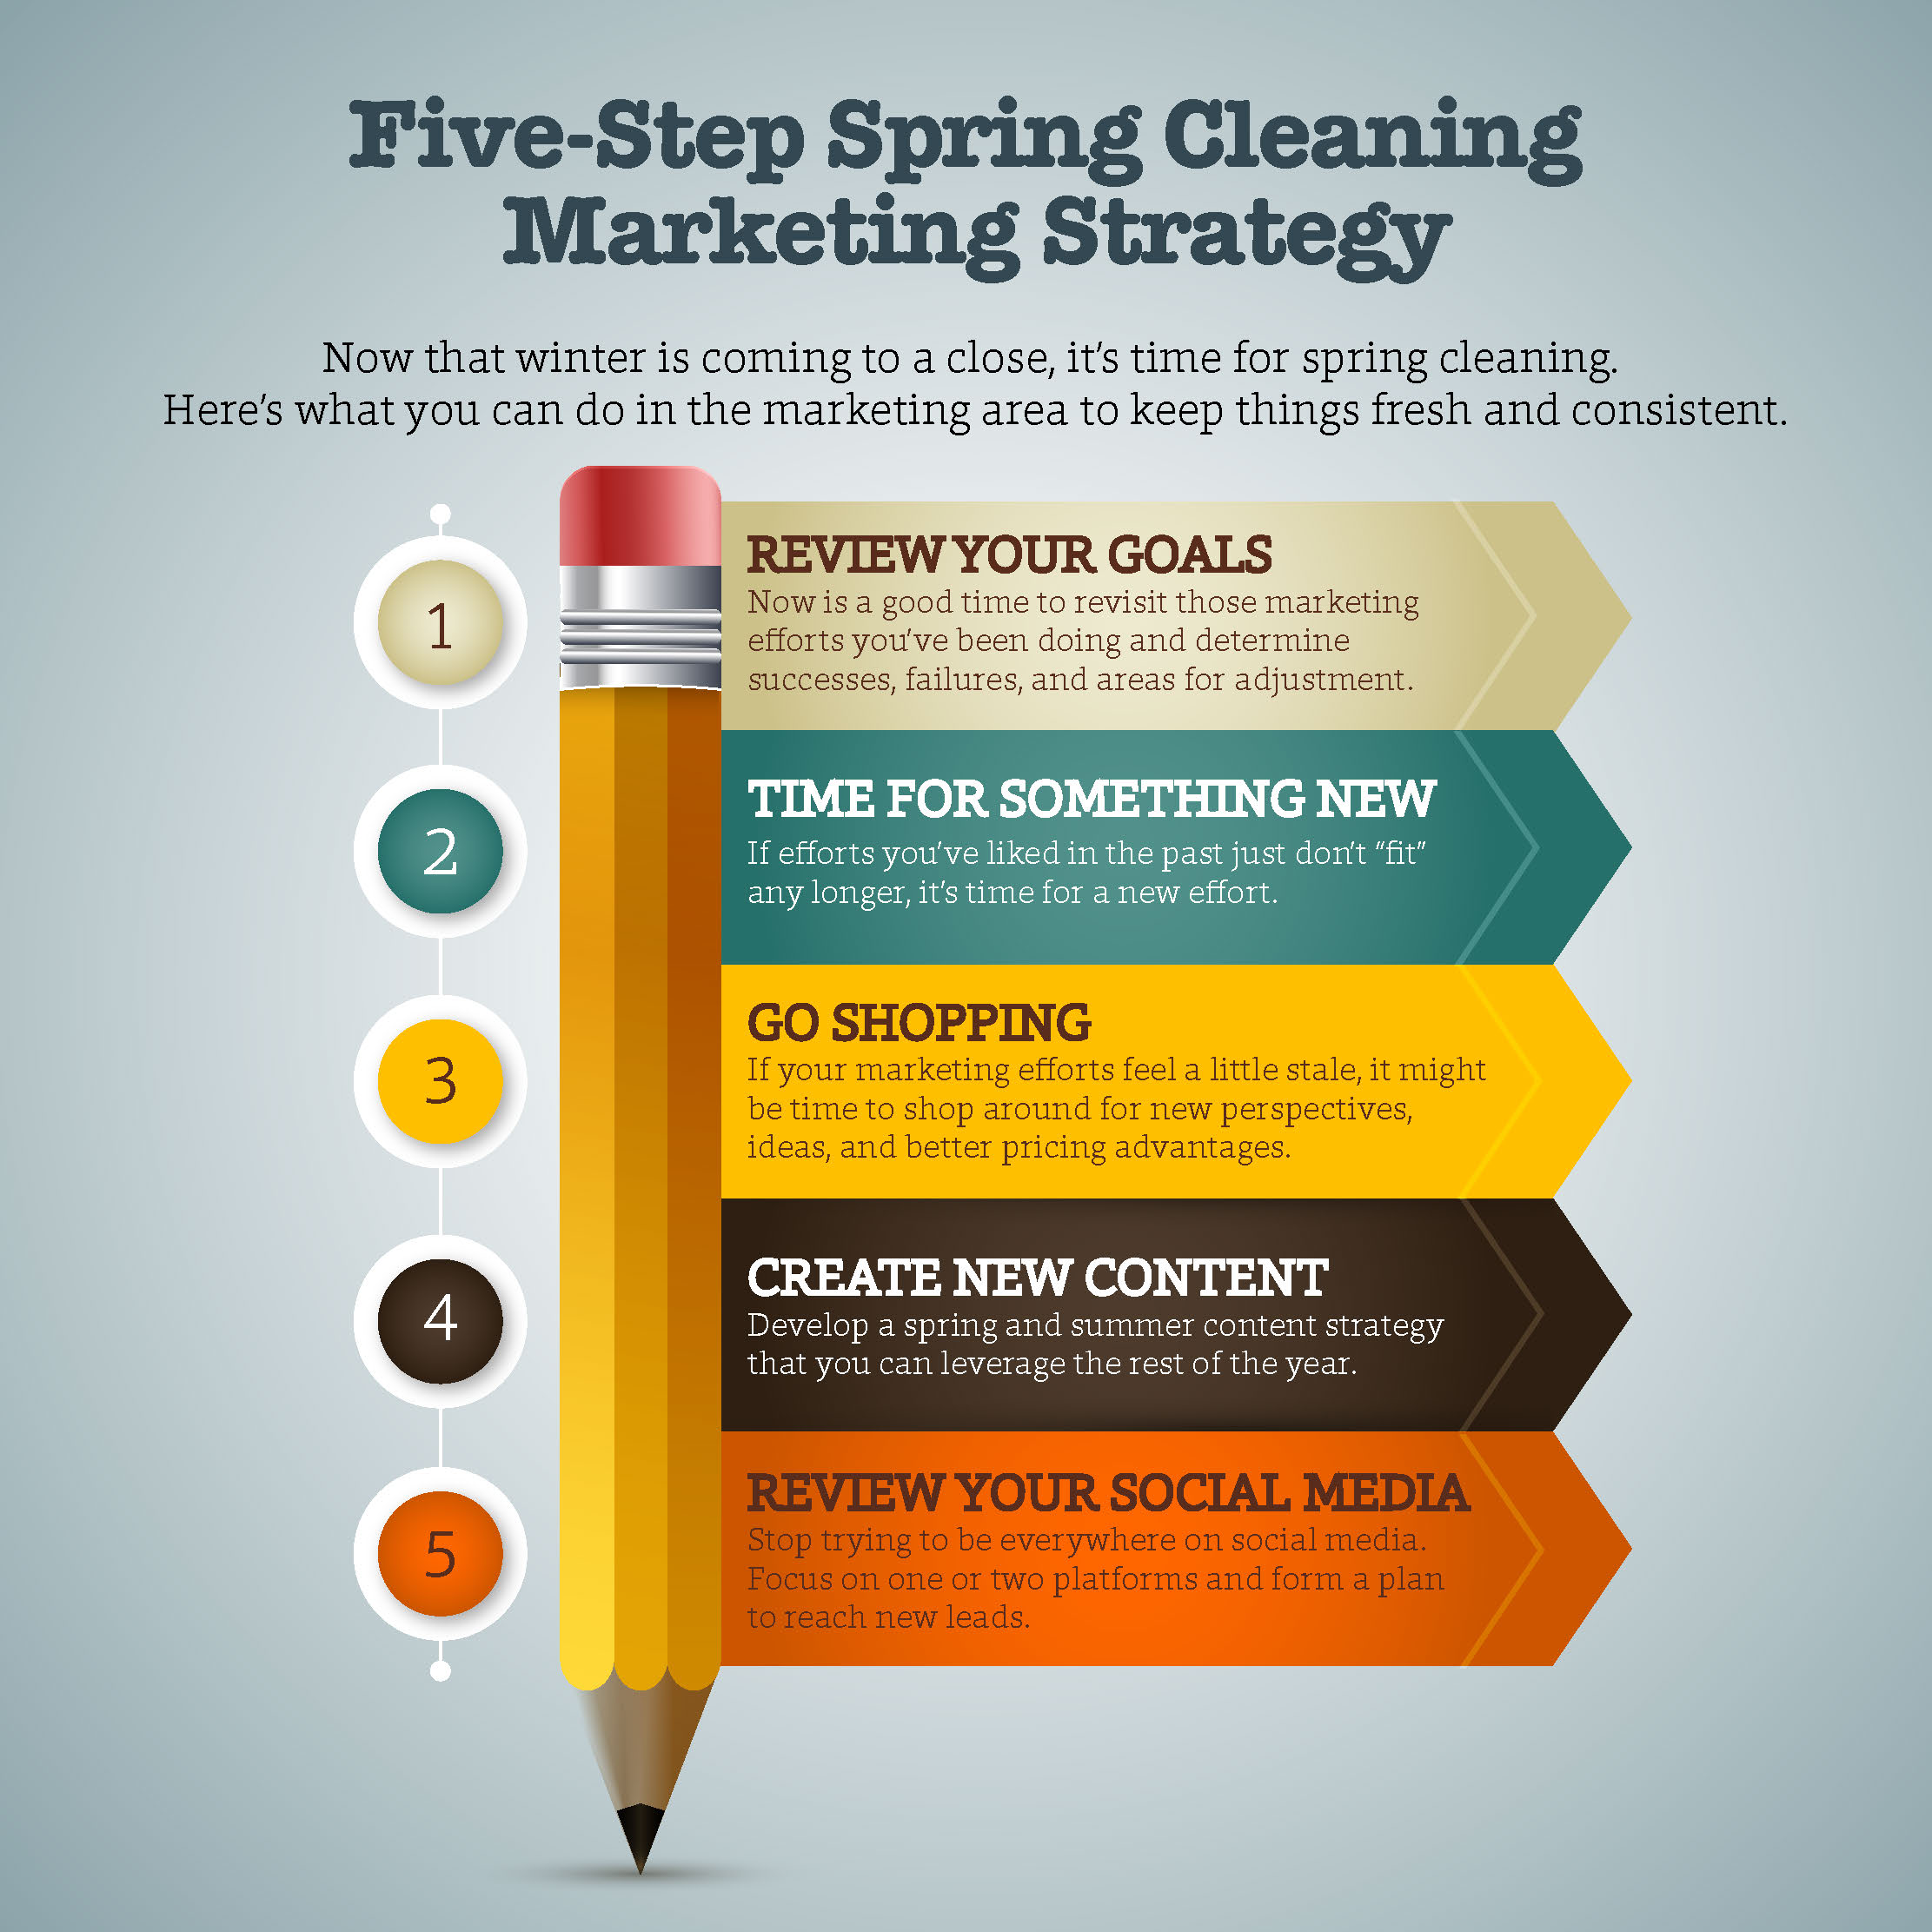 5 Step Spring Cleaning Marketing Strategy_pencil